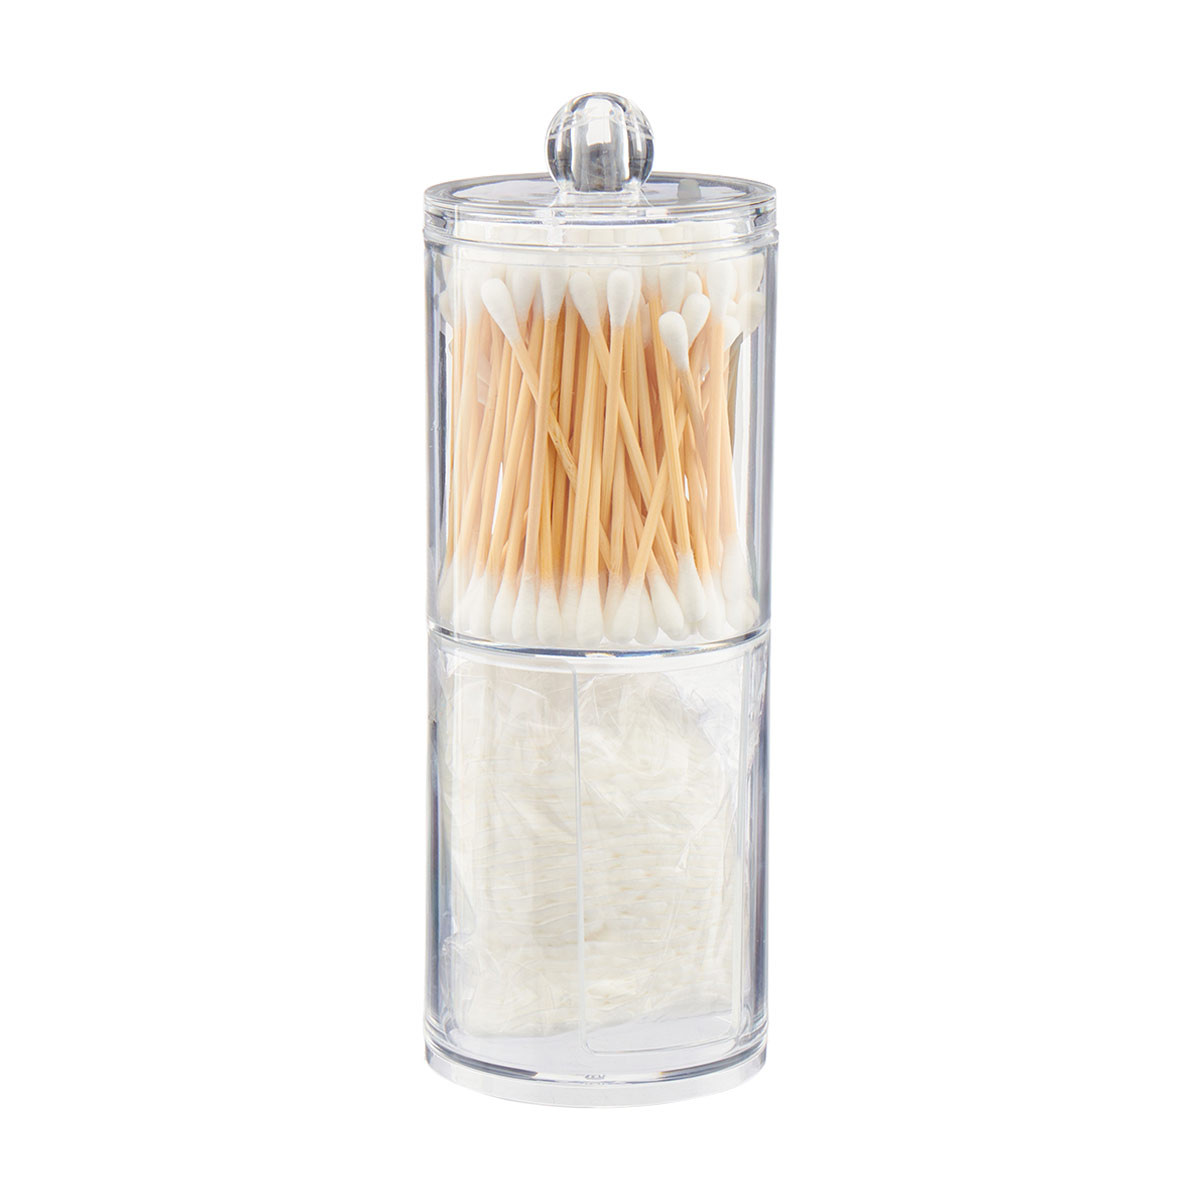 Cotton Swabs Organizer with Lid, 120 ct